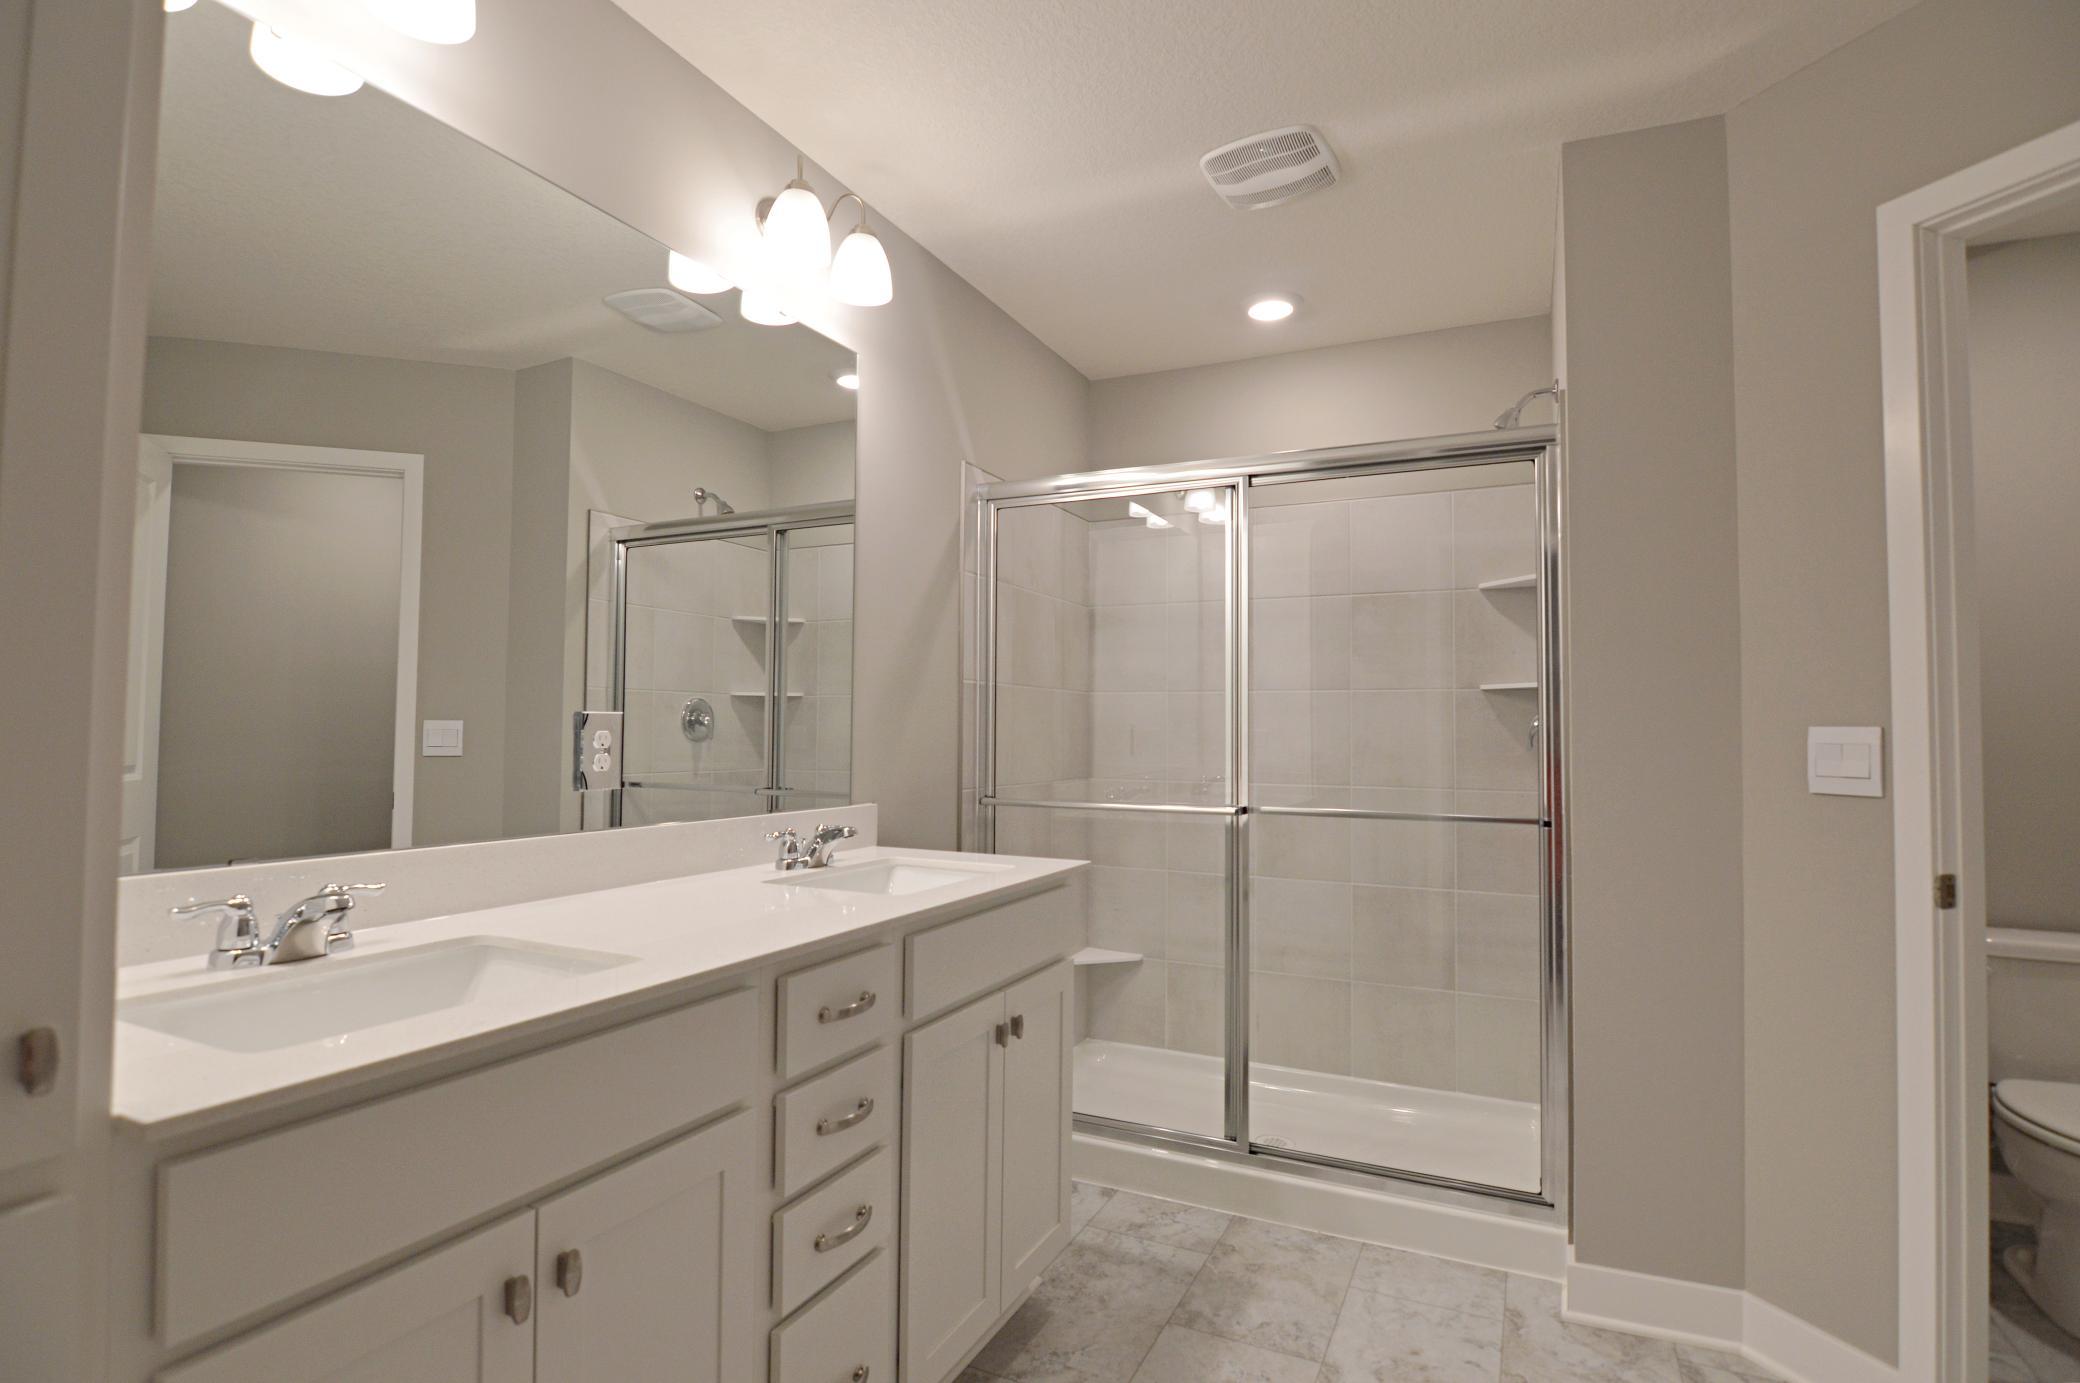 An extension of the primary suite, this private and spacious bathroom contains a double-vanity, an oversized stand-in shower, private stool room and access to the suite's second walk-in closet!!